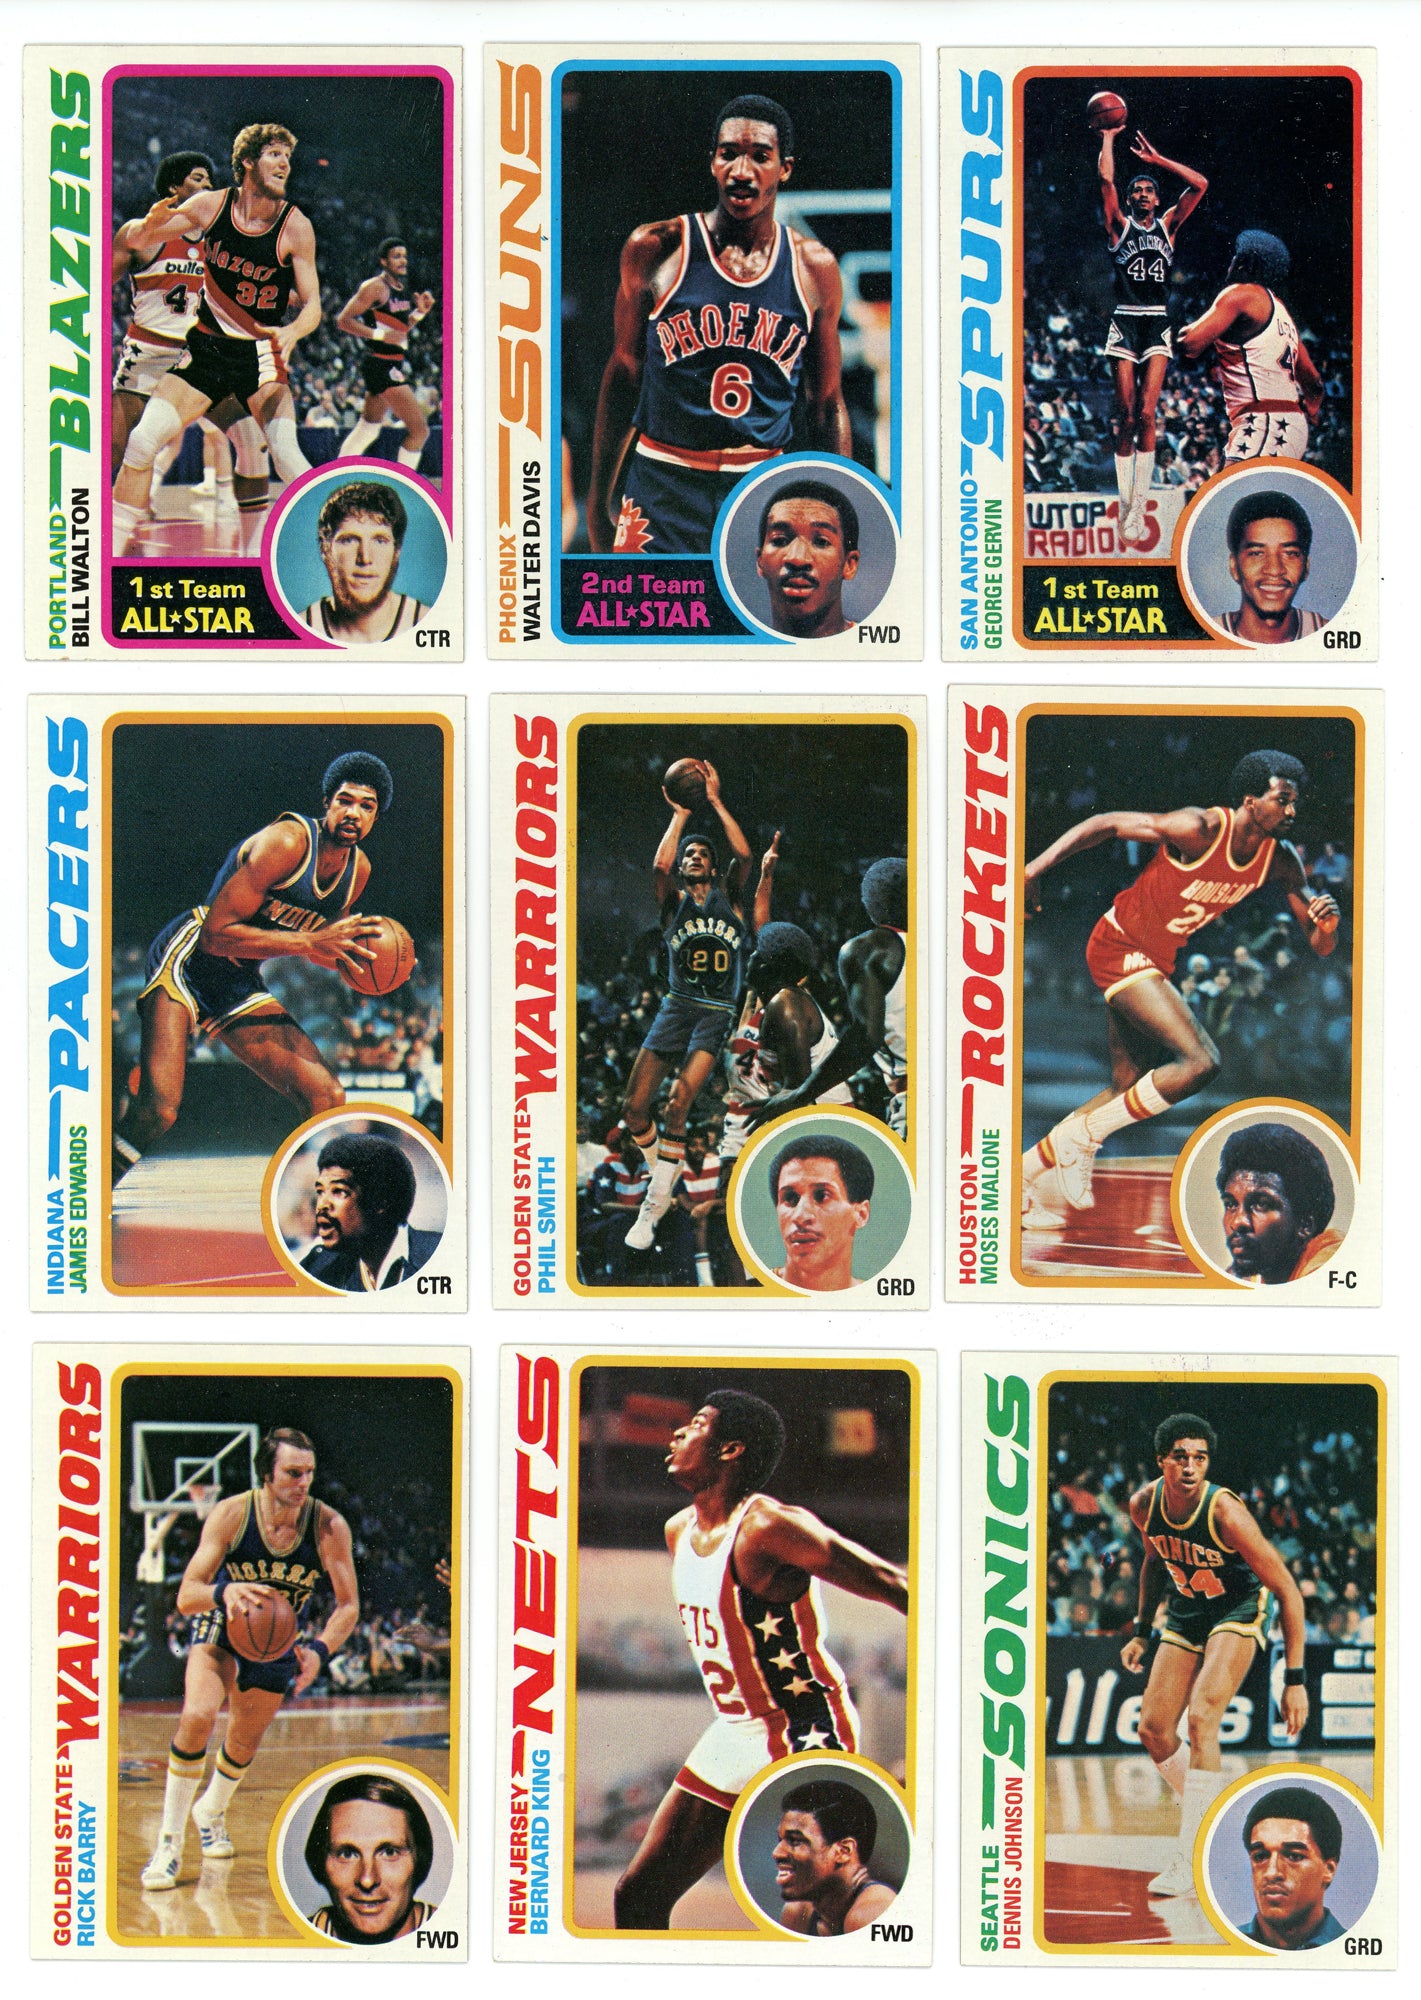 1978-79 TOPPS BASKETBALL COMPLETE SET BREAK - 10 CARDS PER BOX! 2-3 HOFers IN EVERY BOX!